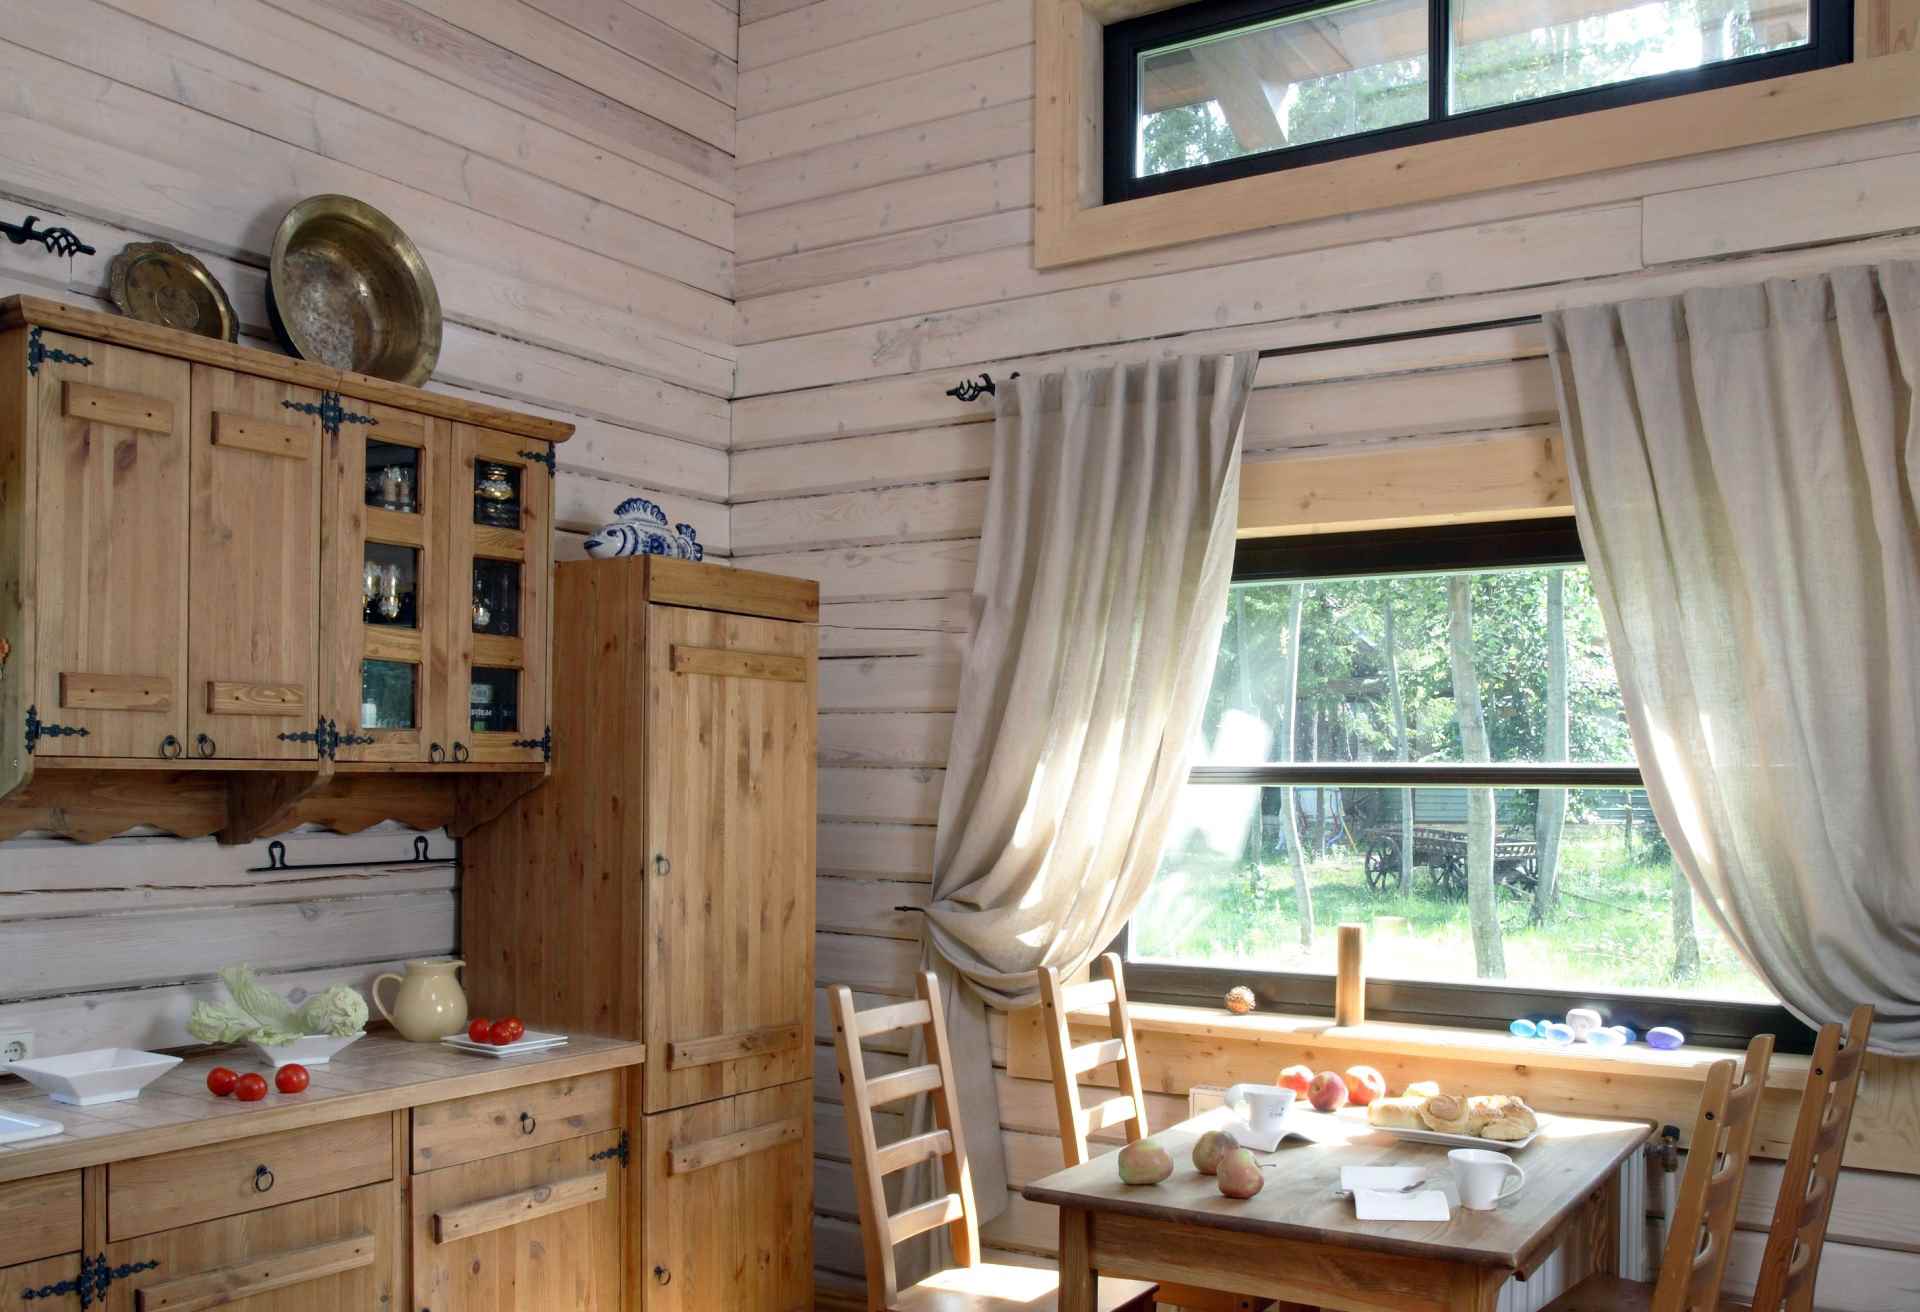 An example of an unusual kitchen decor in a wooden house